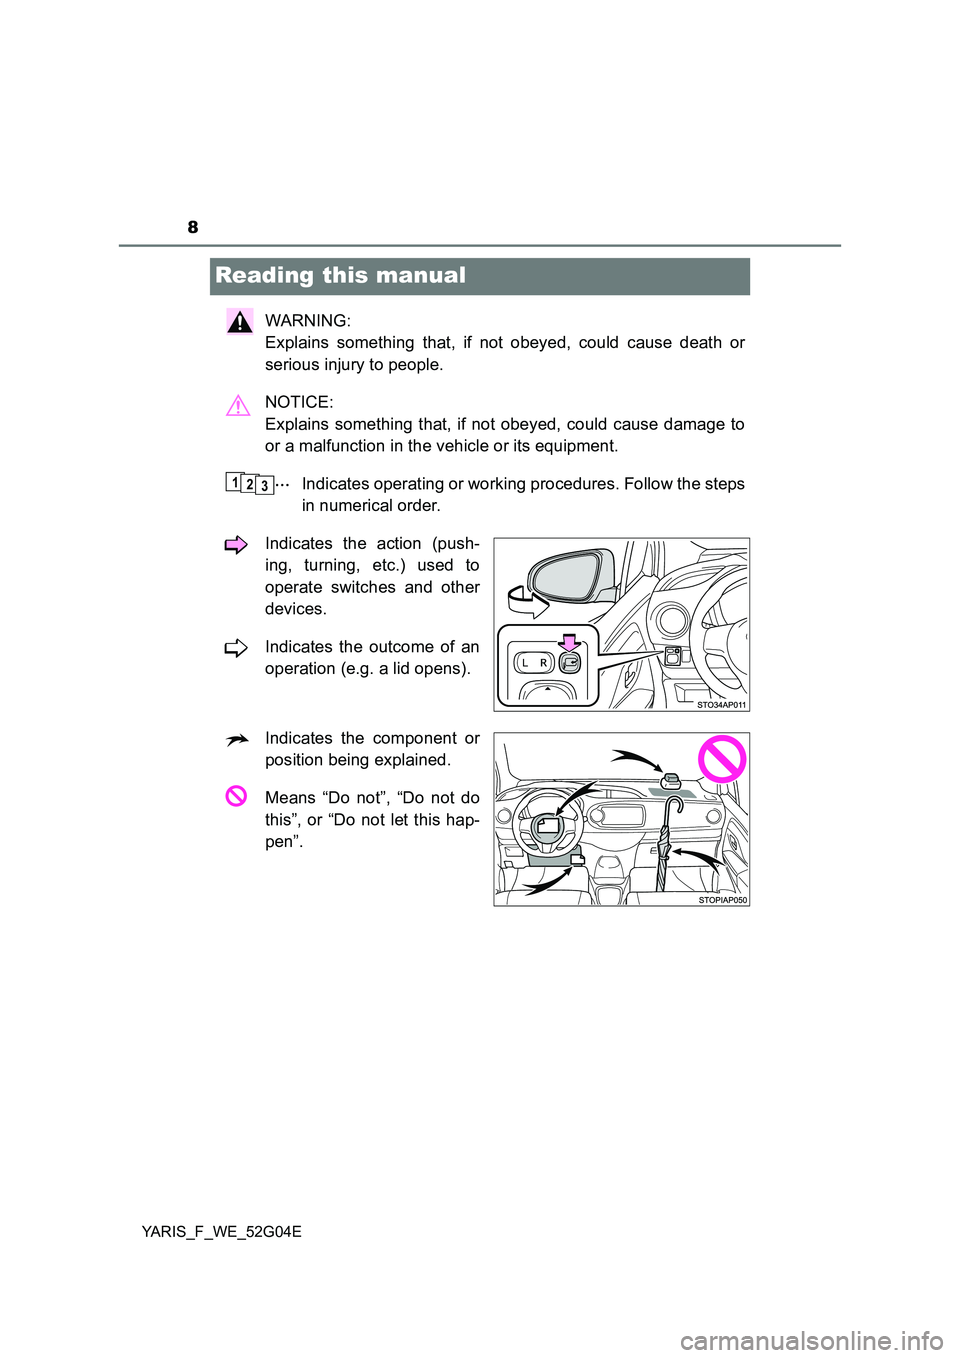 TOYOTA YARIS 2016  Owners Manual 8
YARIS_F_WE_52G04E
Reading this manual
WARNING:  
Explains something that, if not obeyed, could cause death or 
serious injury to people. 
NOTICE:  
Explains something that, if not obeyed, could caus